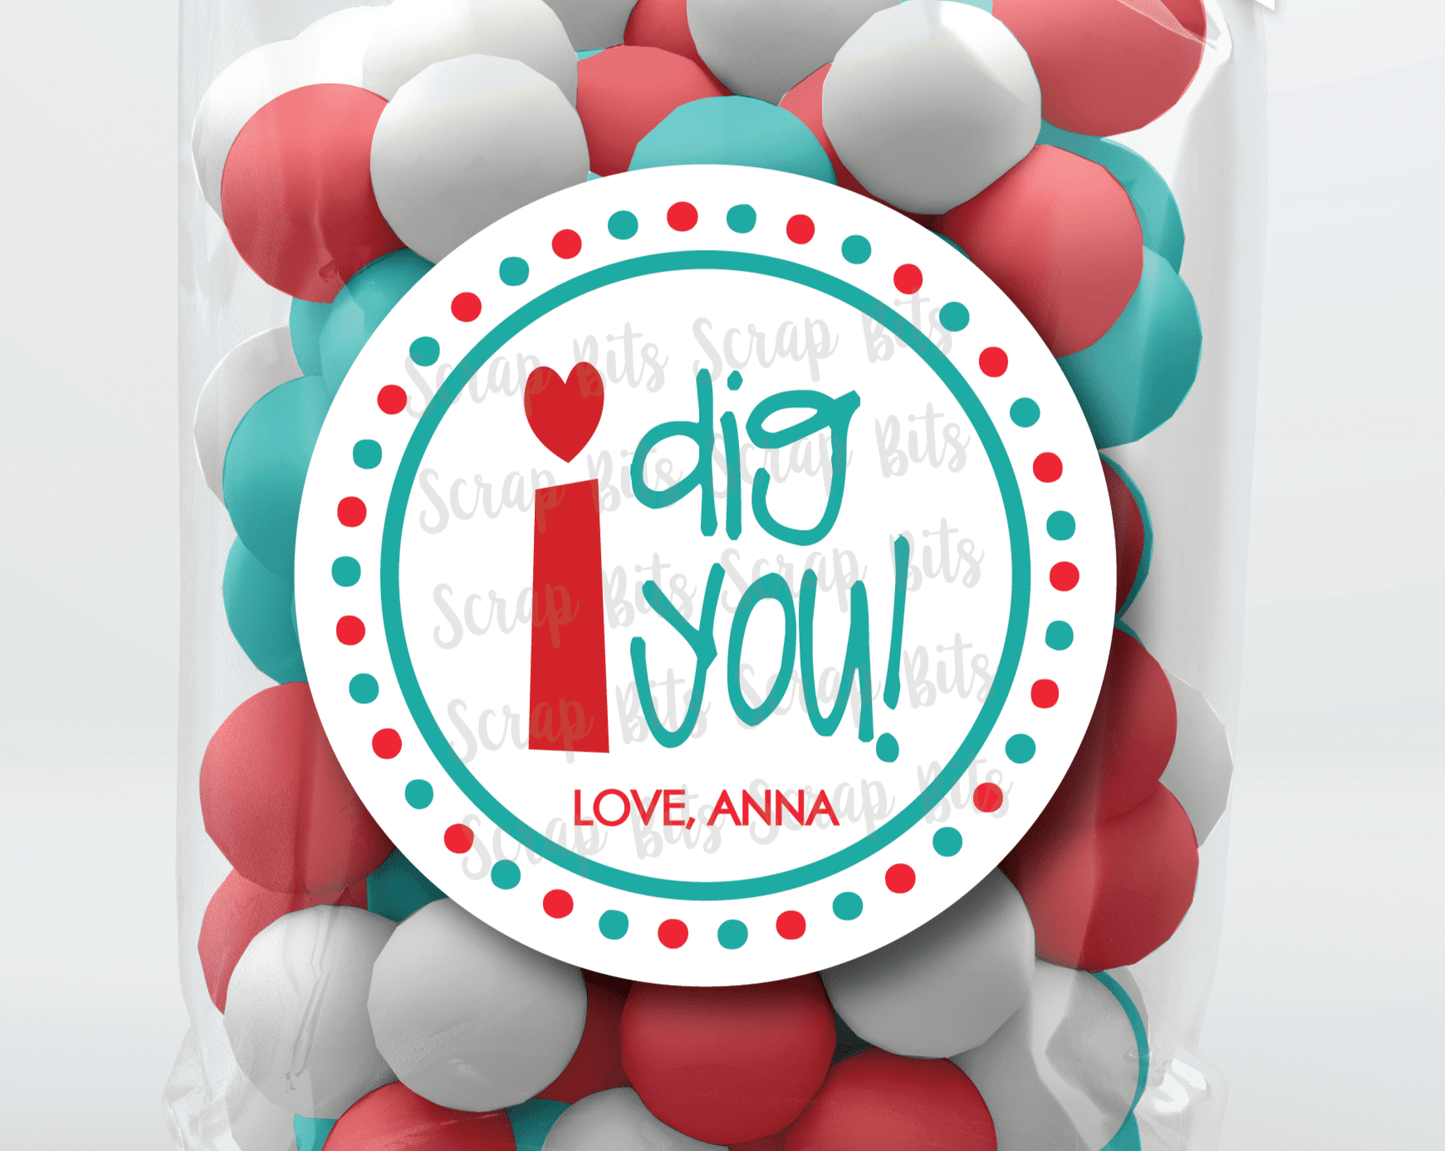 I Dig You Valentine . Valentine's Day Stickers or Tags - Scrap Bits